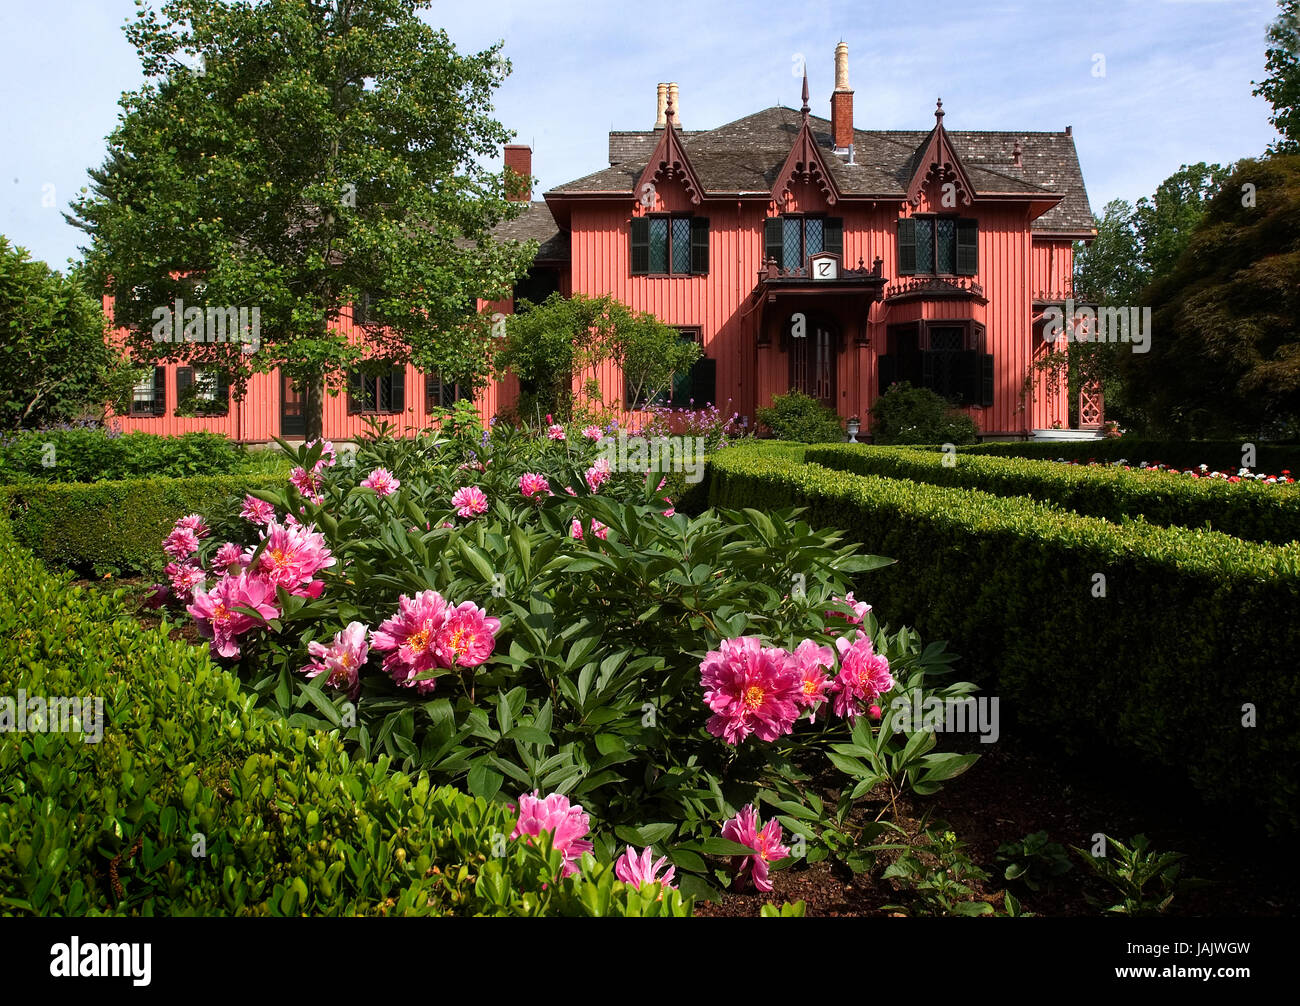 Built in 1846 in the newly fashionable Gothic Revival style, Roseland Cottage depicts summer life in Connecticut, US Stock Photo